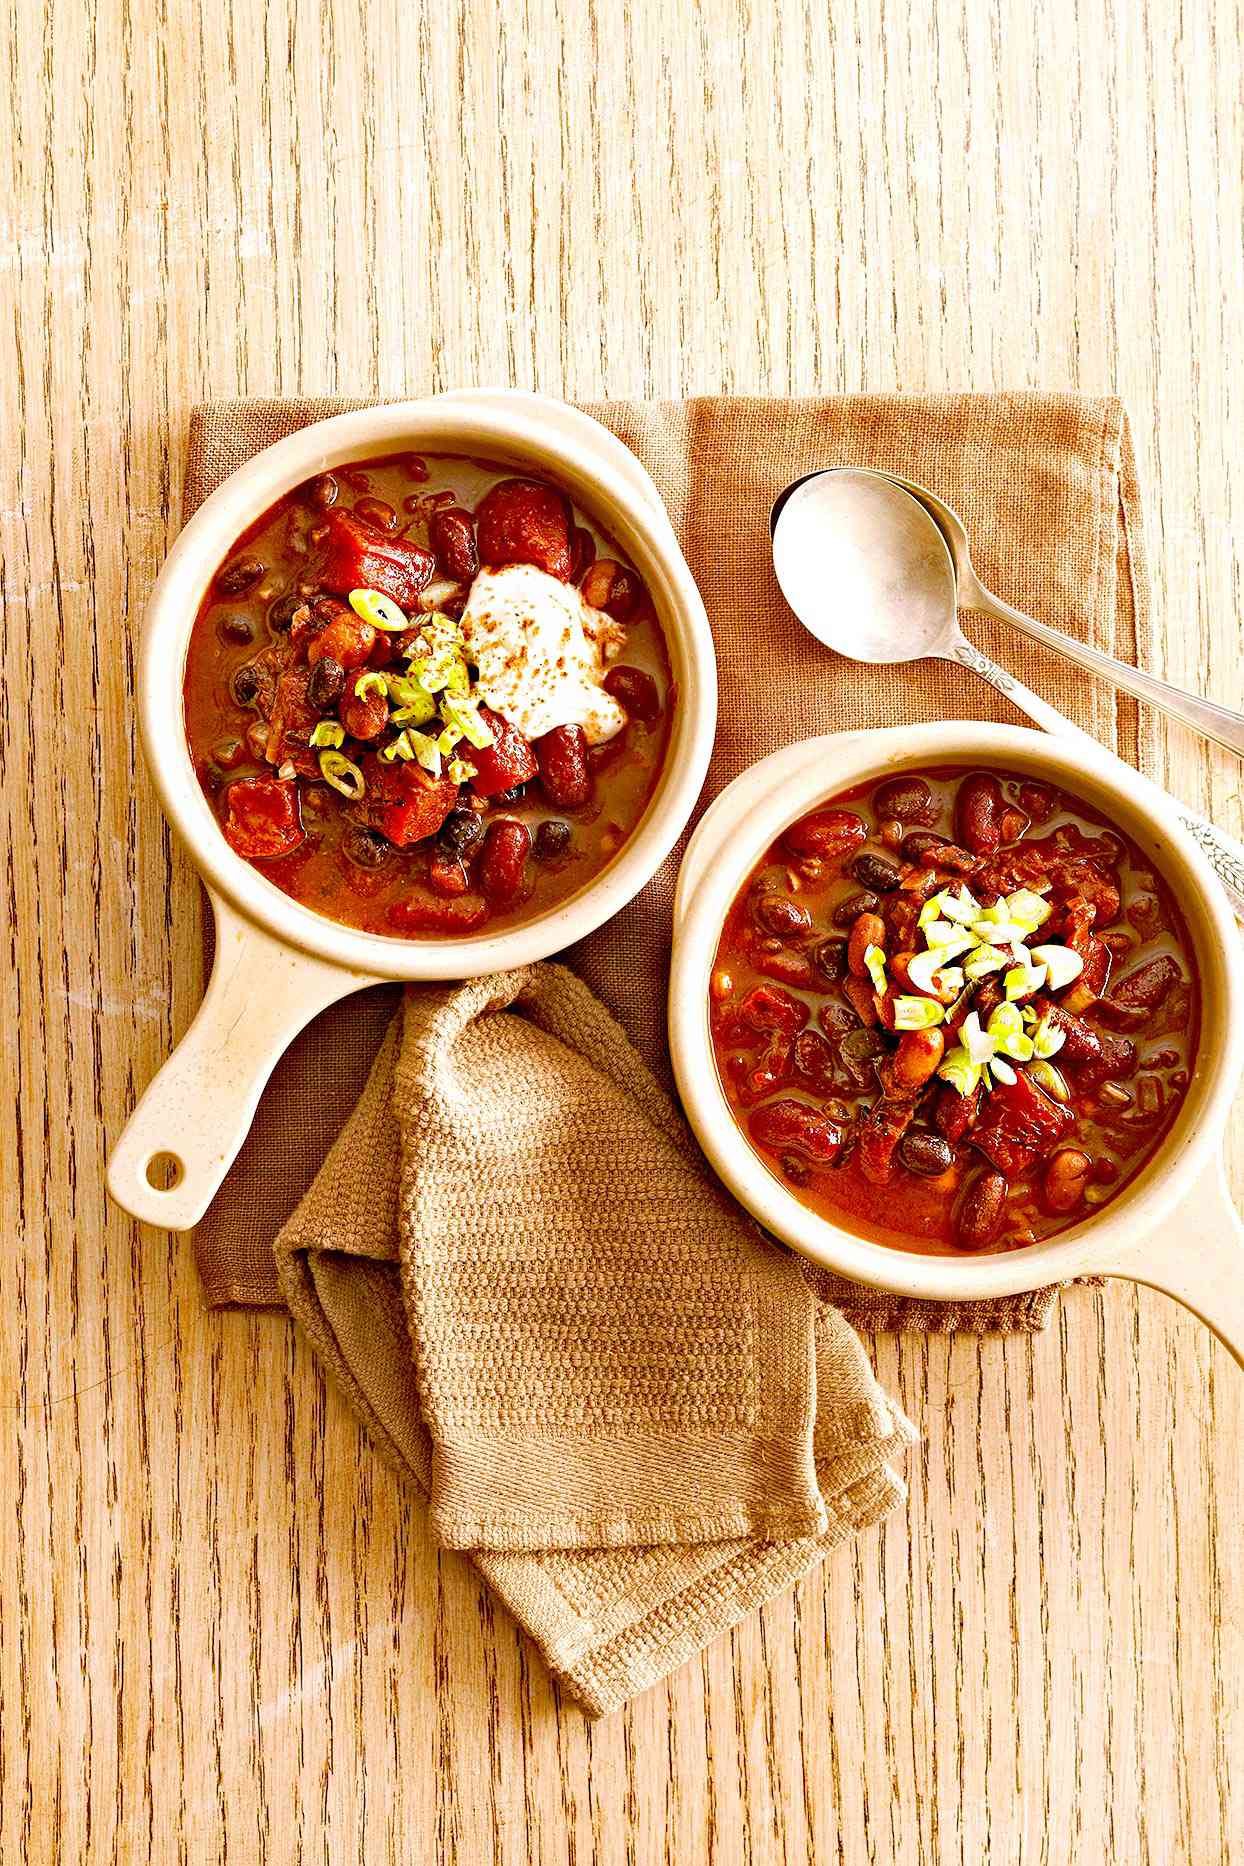 Slow-Cooker Chocolate Chili with Three Beans